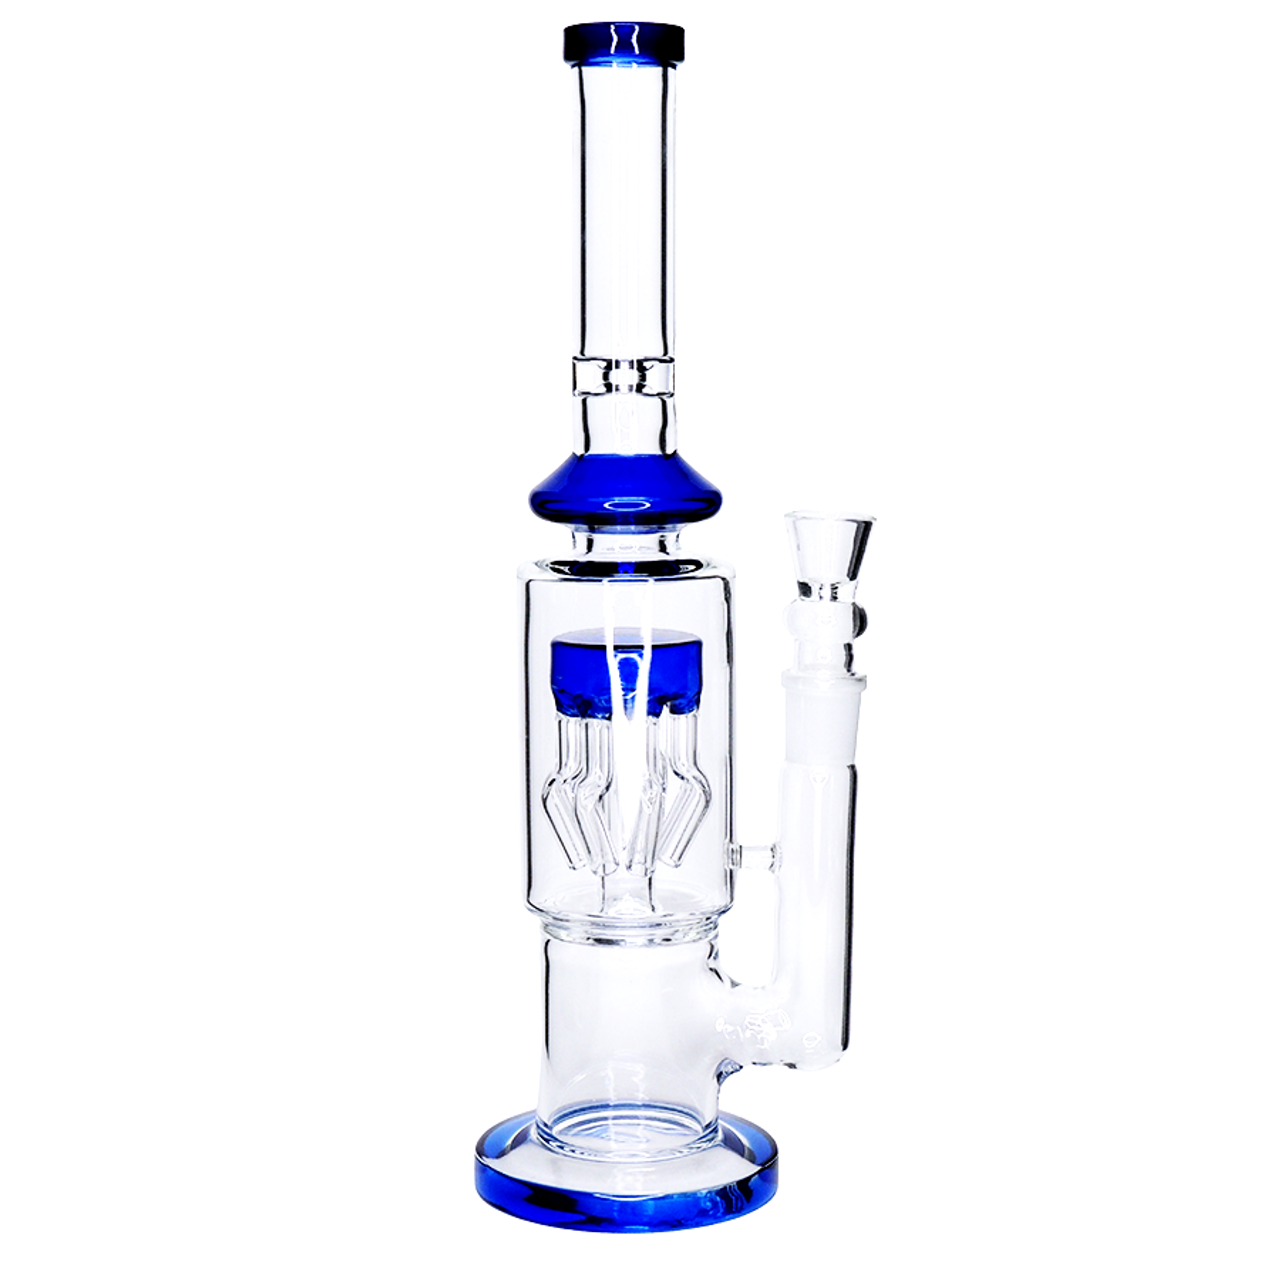 12" Showerhead Water Pipe - Assorted